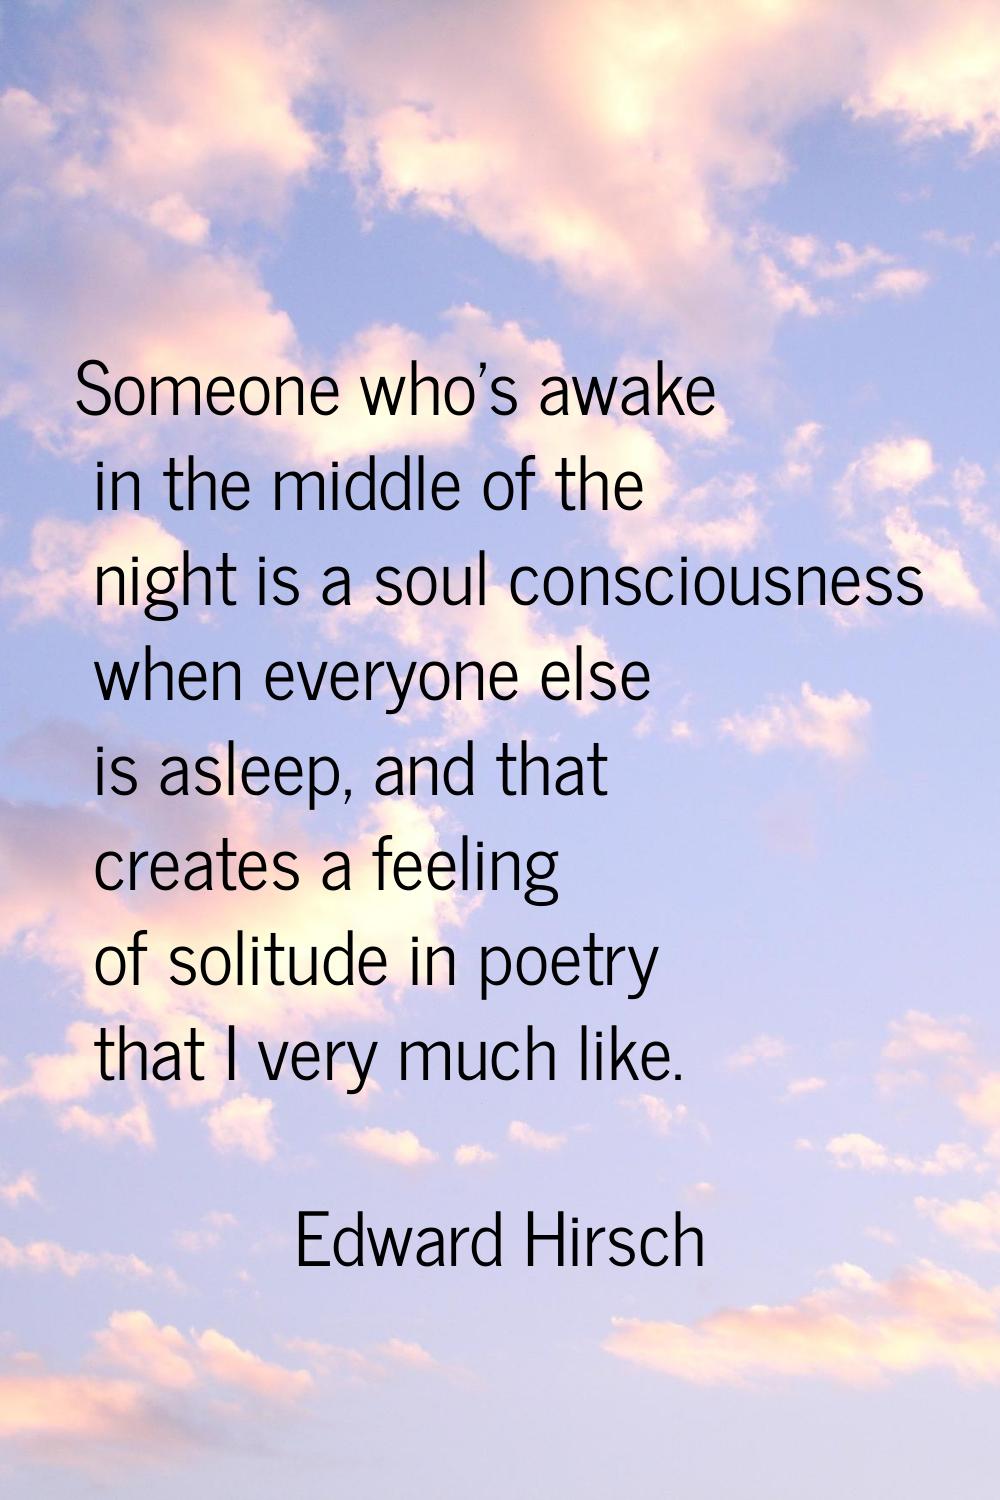 Someone who's awake in the middle of the night is a soul consciousness when everyone else is asleep